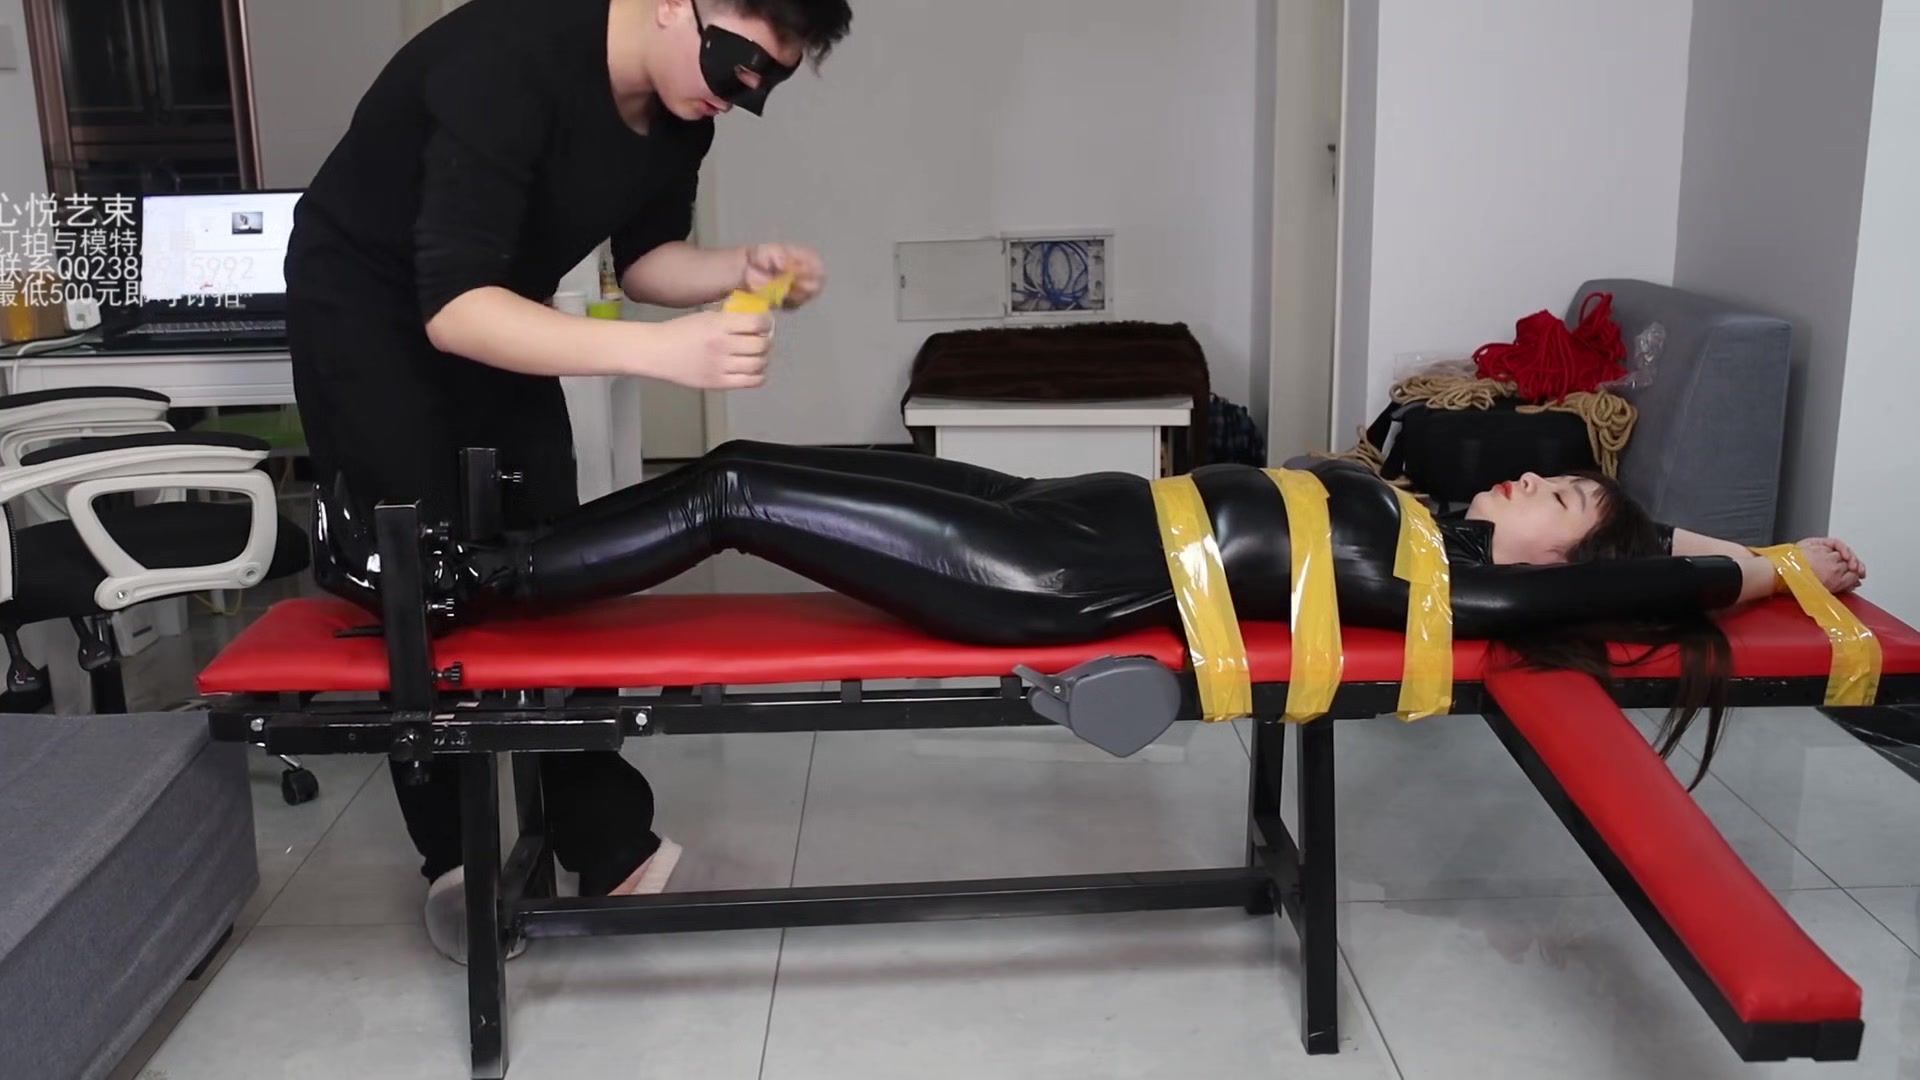 Comedor Asian Latex Catsuit Table Tape Bondage Cheating - 1